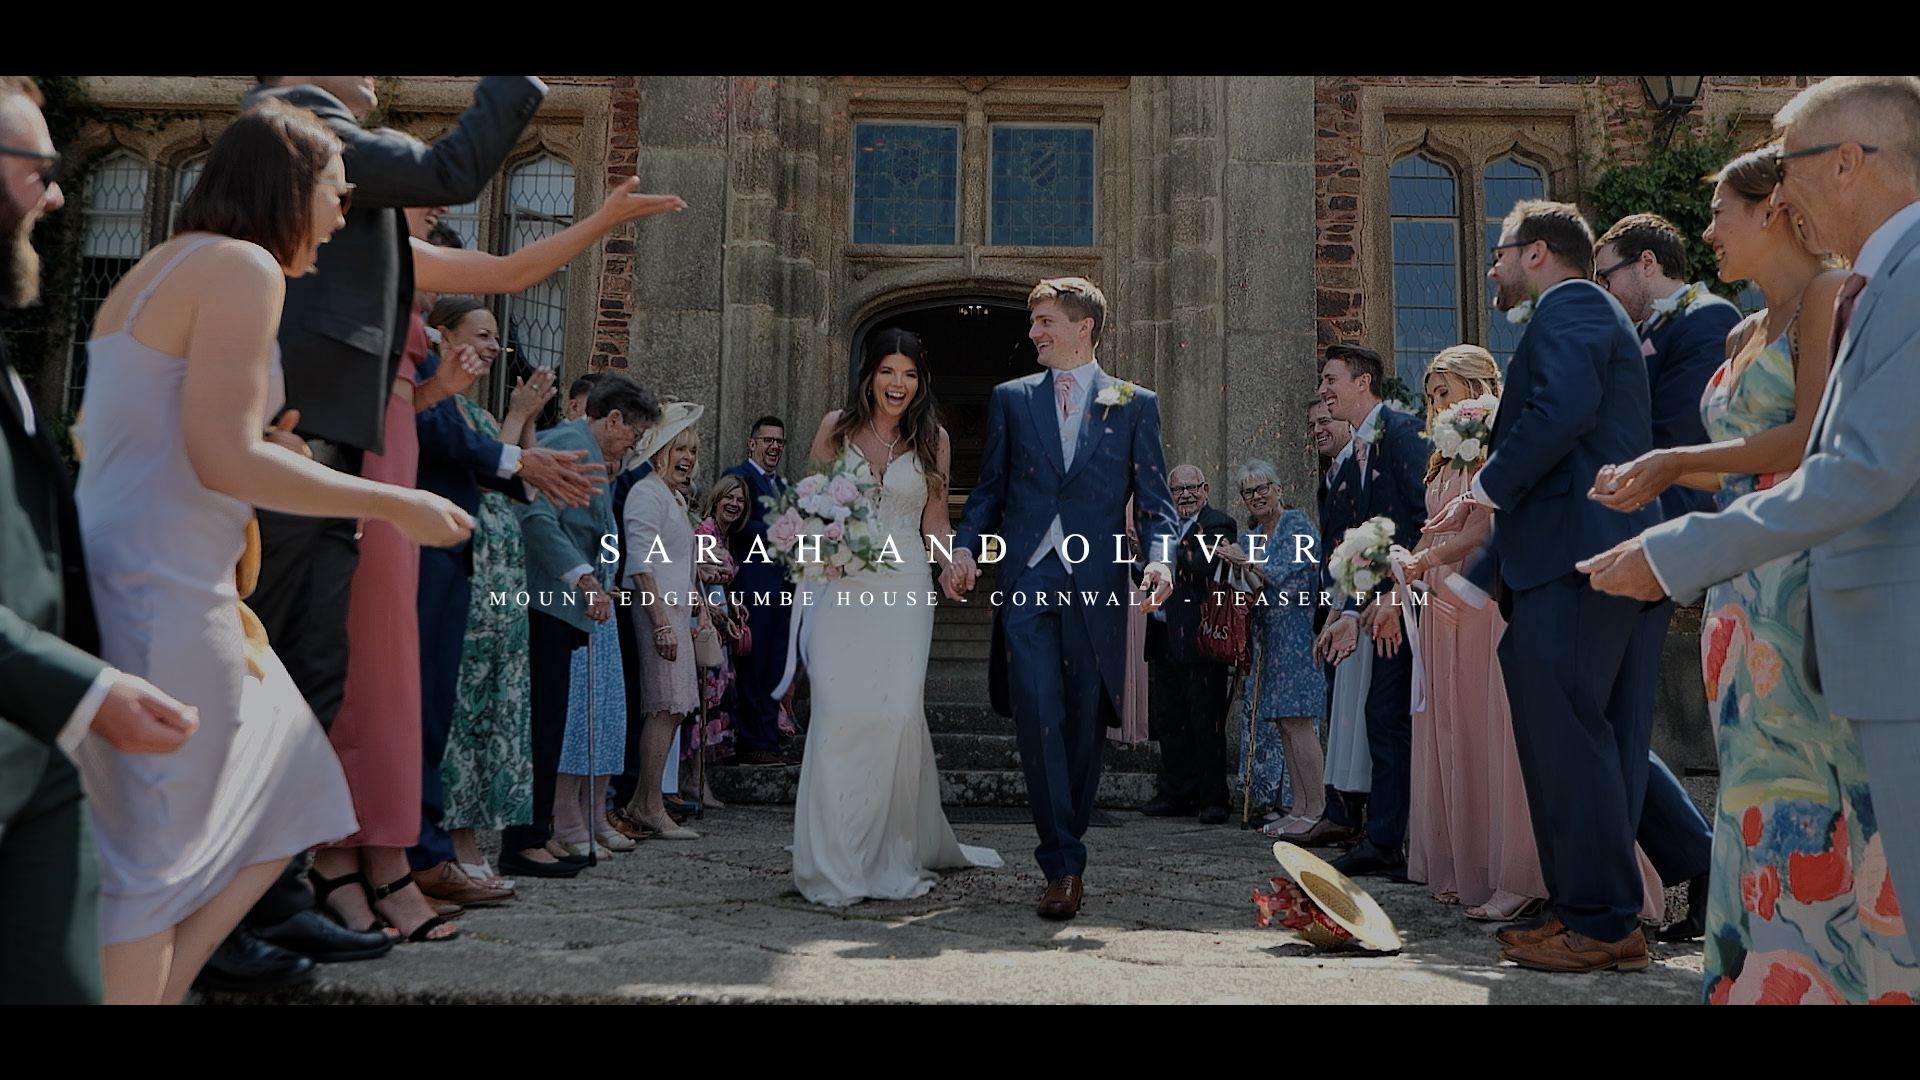 Sarah and Oliver - Mount Edgecumbe House, Cornwall - 16th July 2022